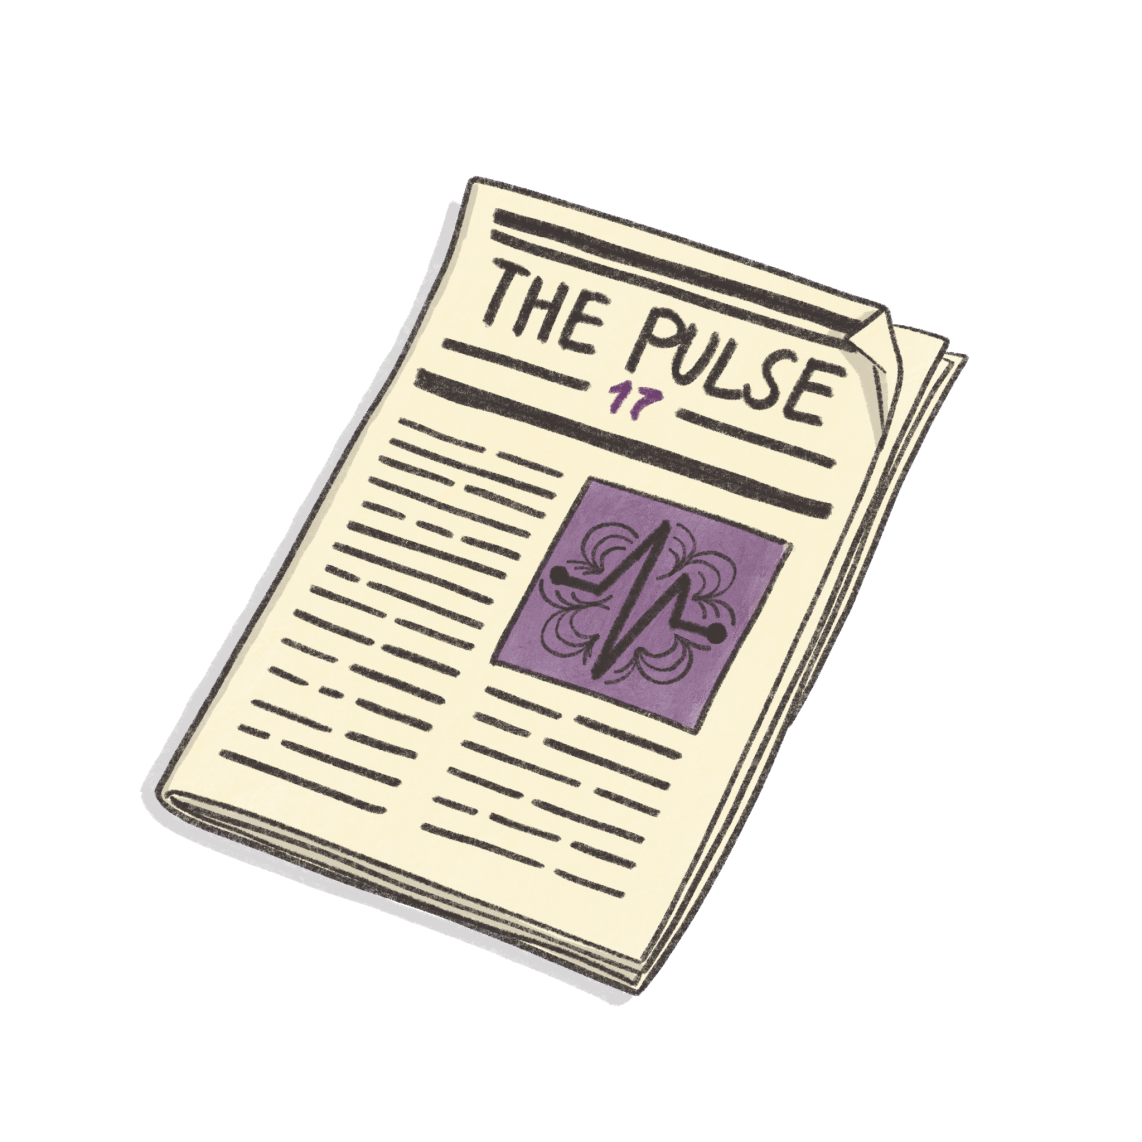 The Apoio Pulse – Issue 17